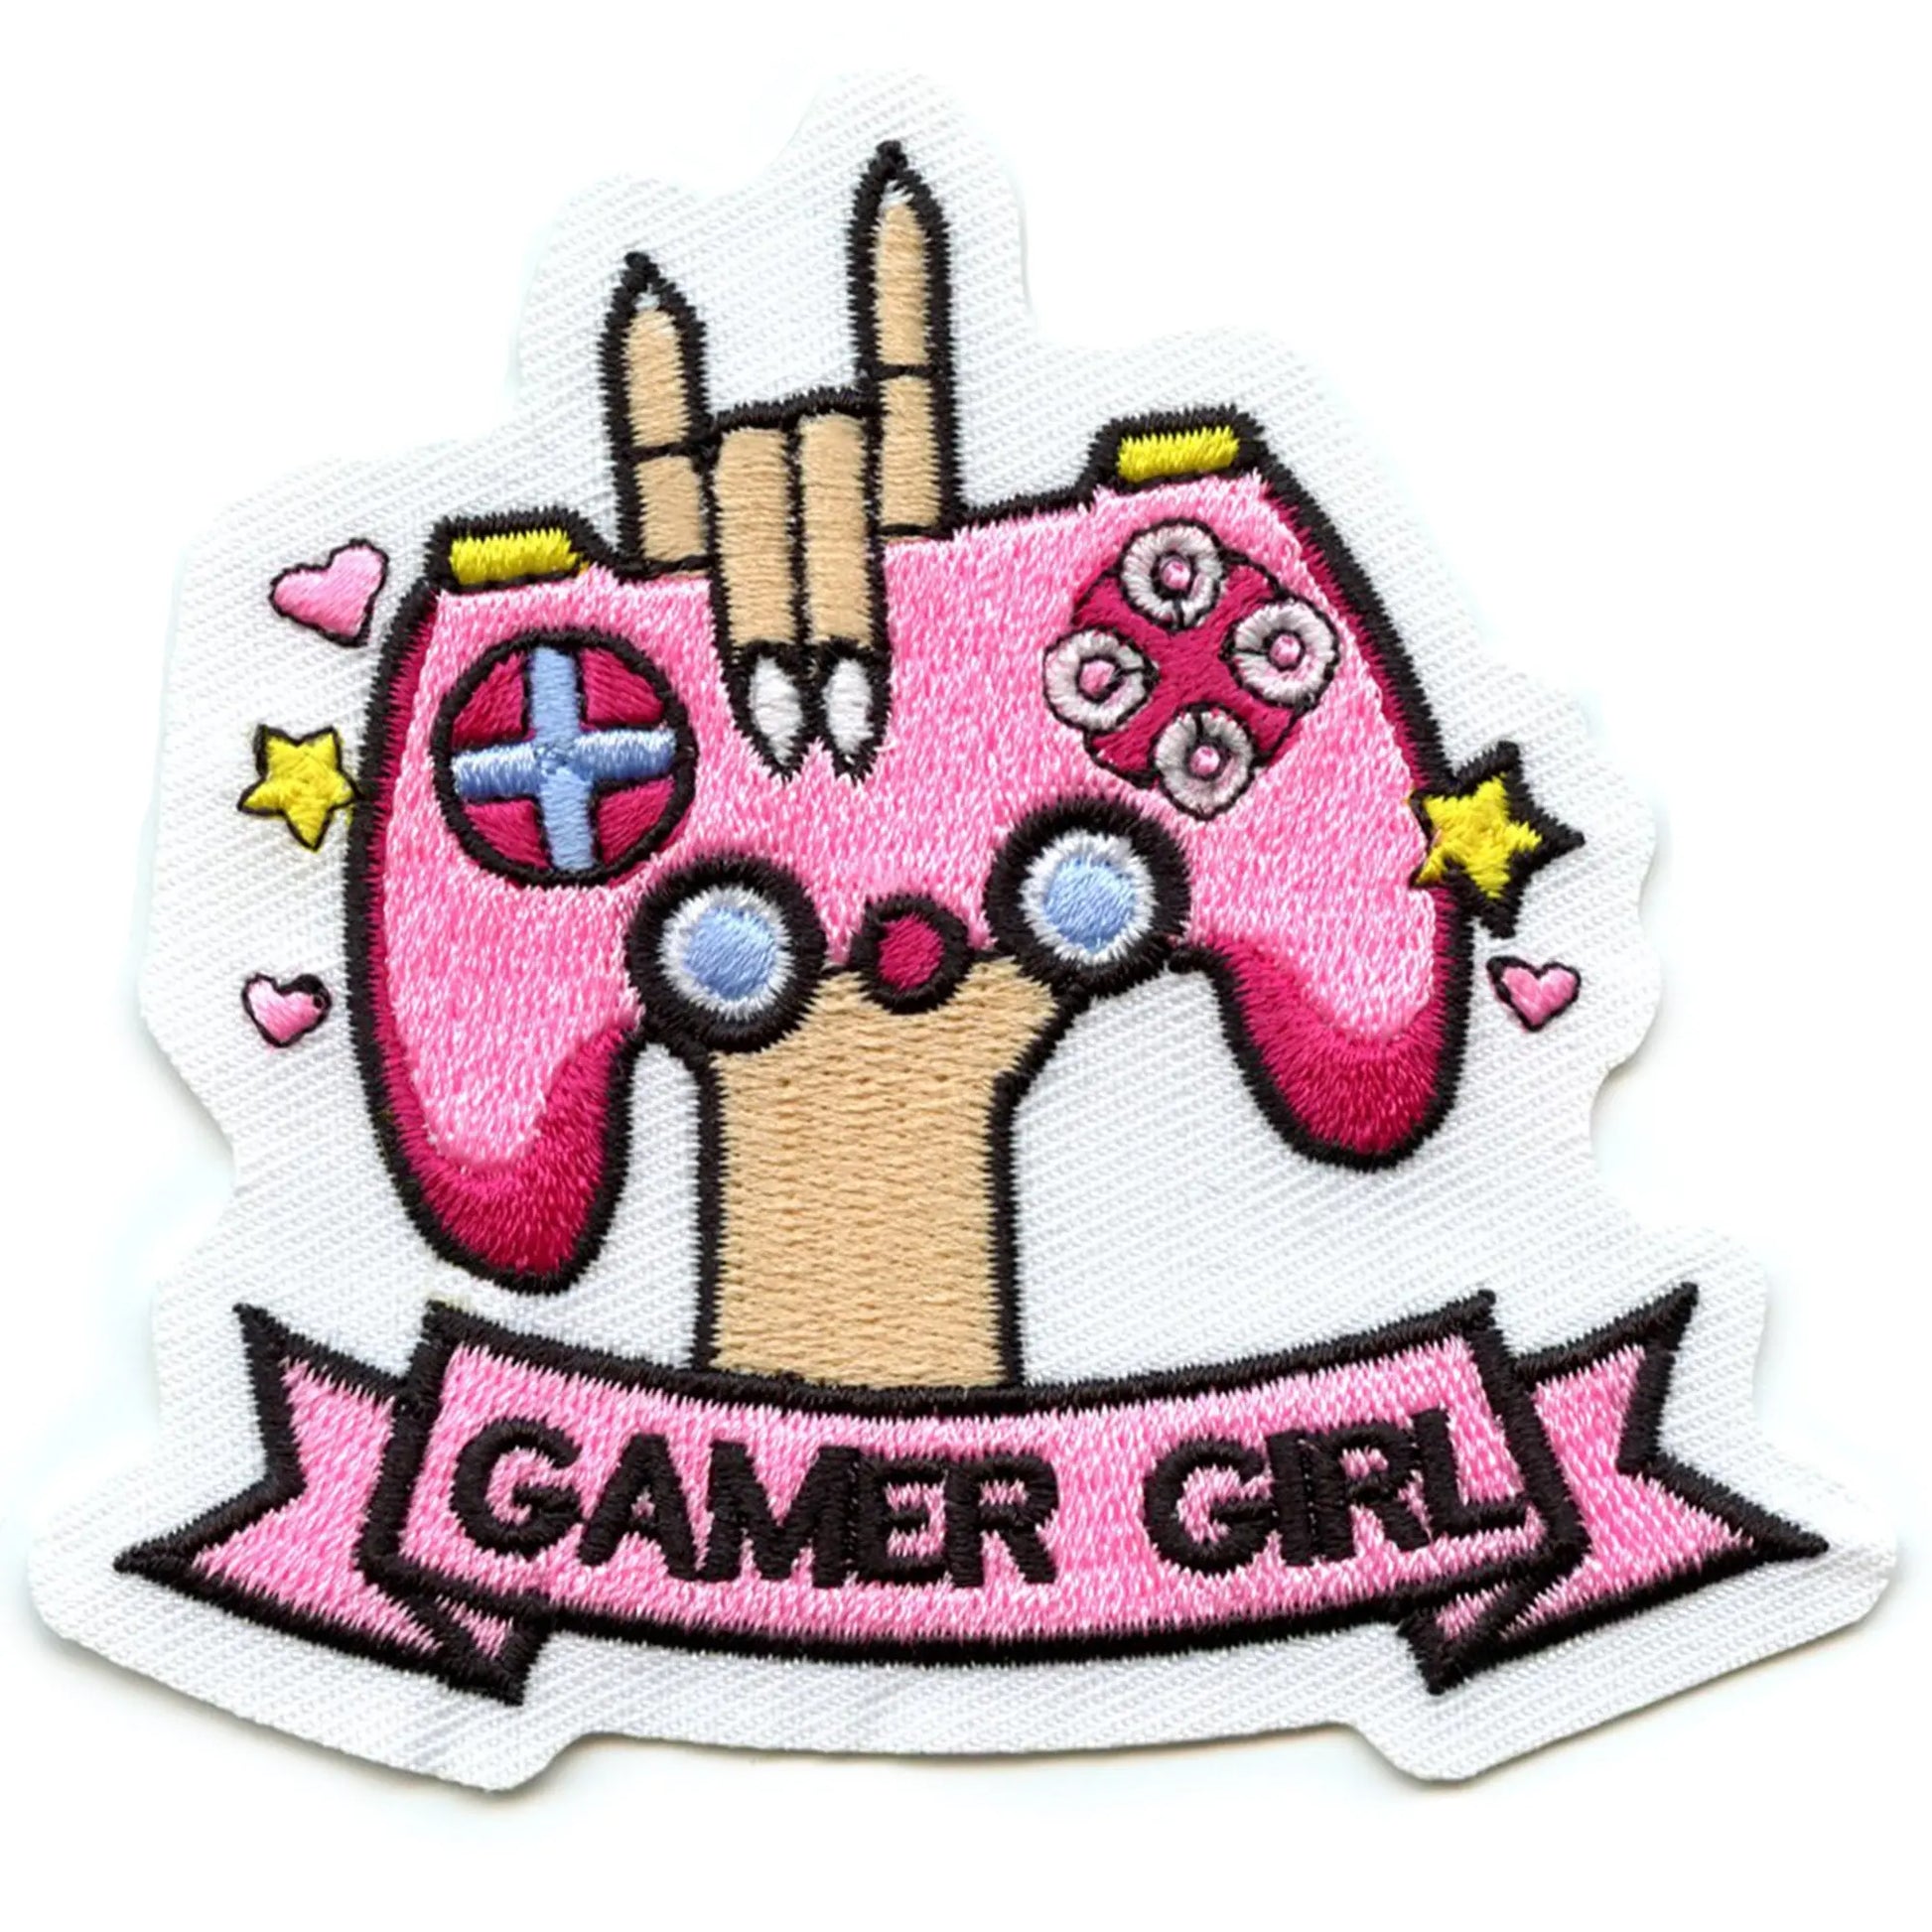 Gamer Girl Pink Logo Patch Feminine Video Game Player Embroidered Iron On